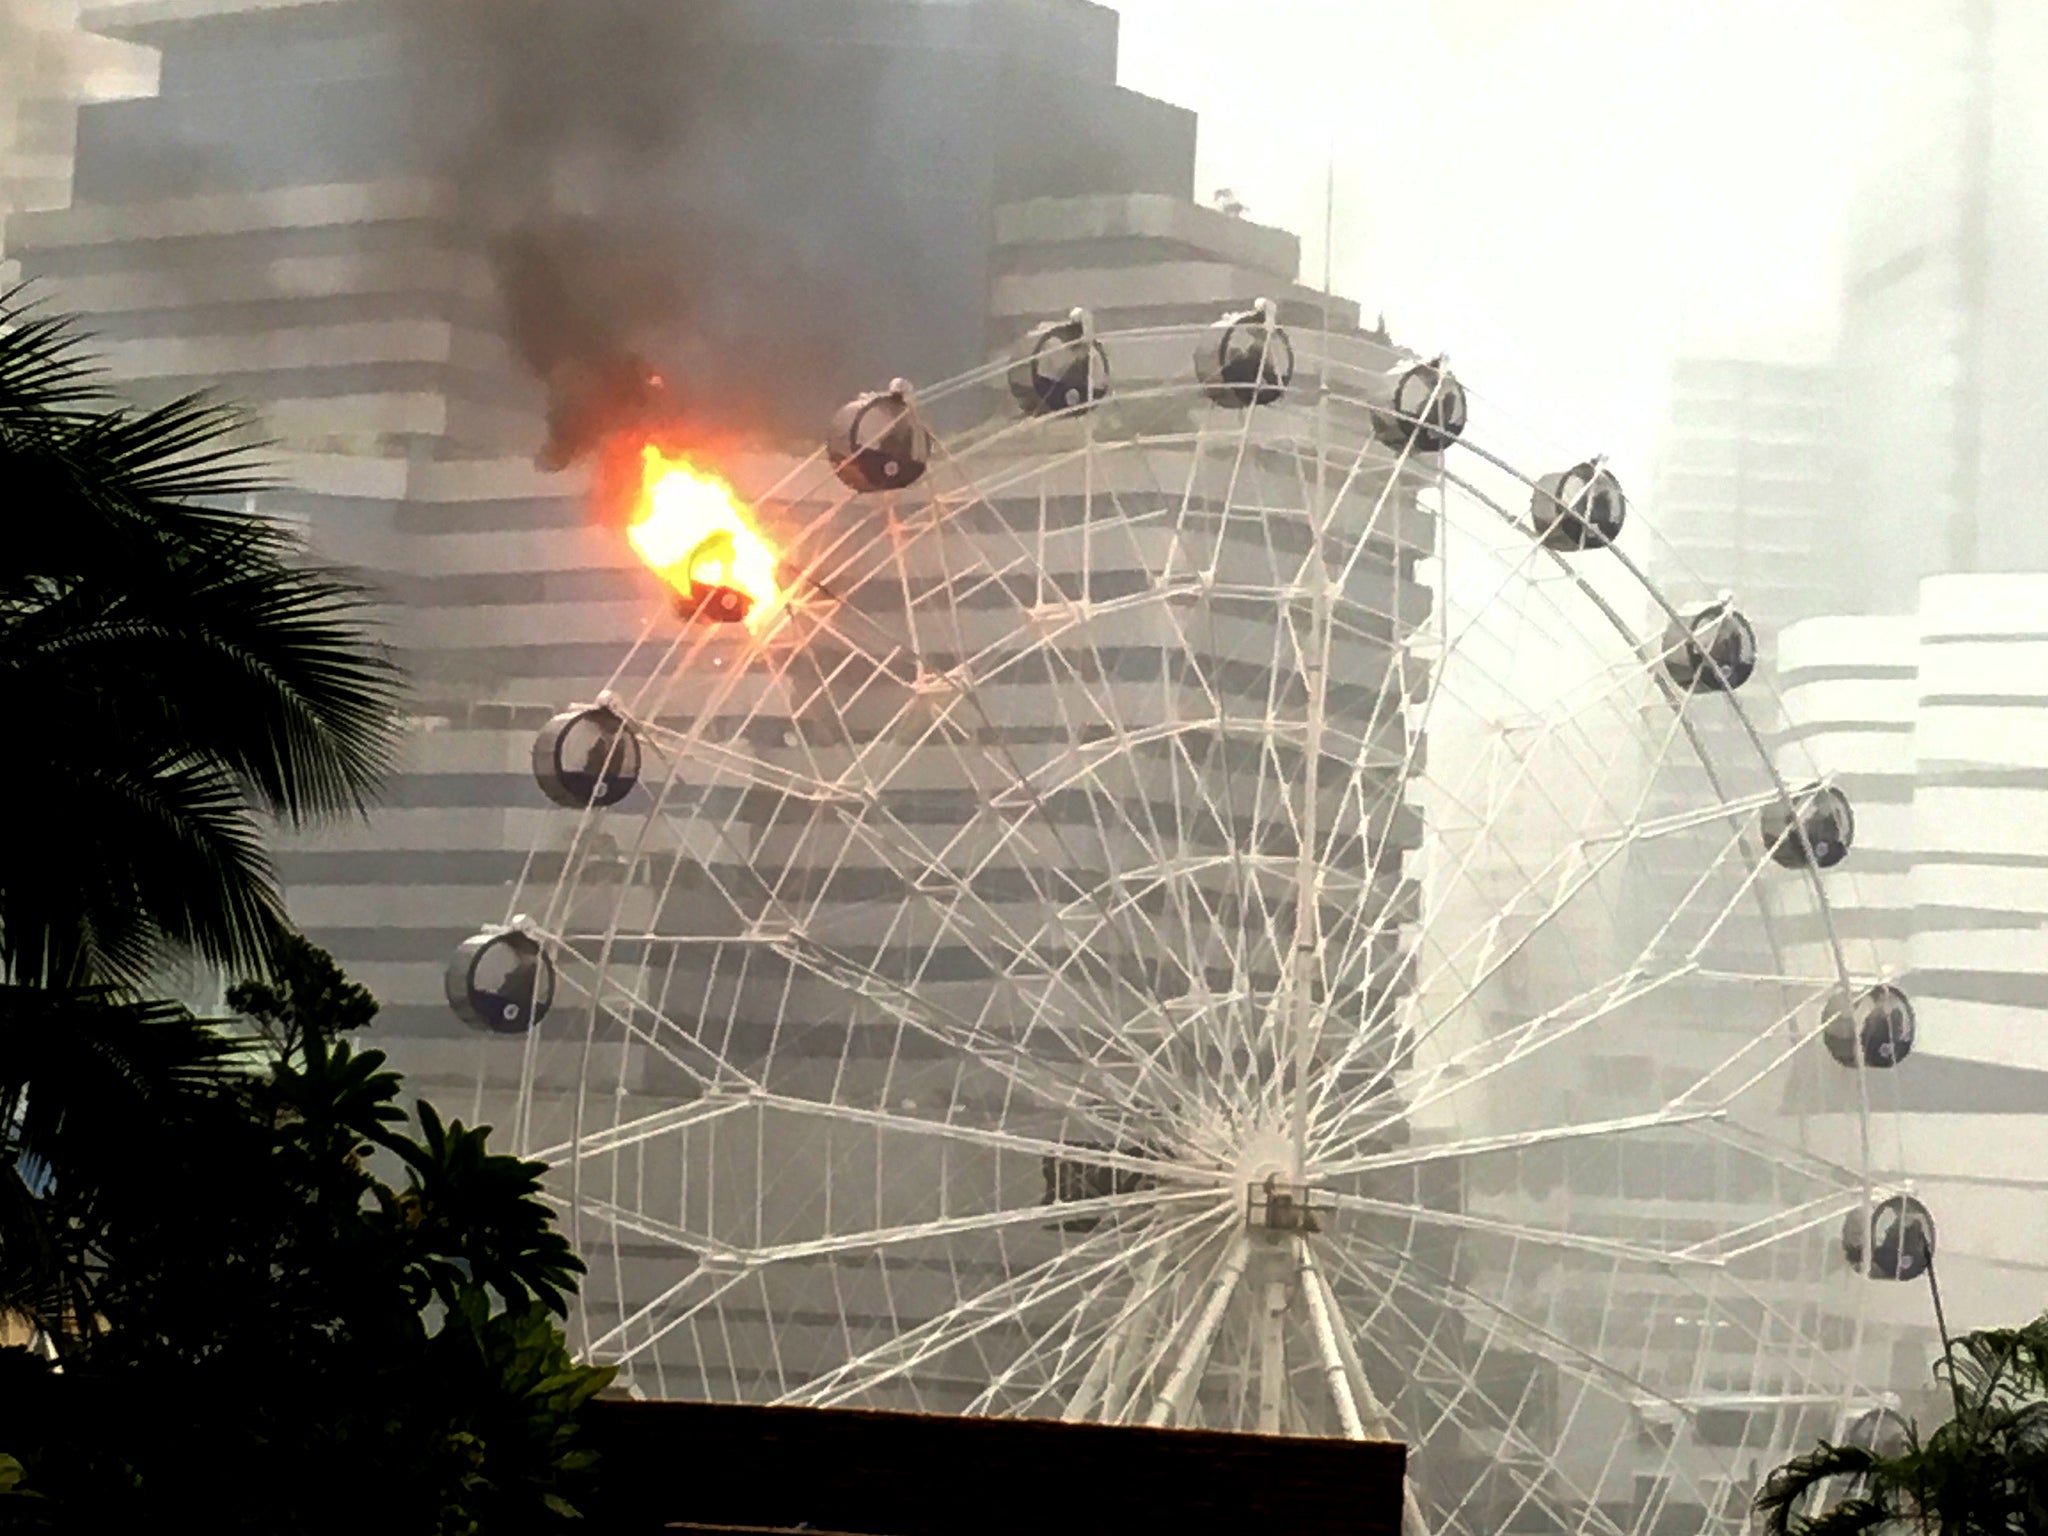 The fire on the 50-foot wheel could be seen from the ground